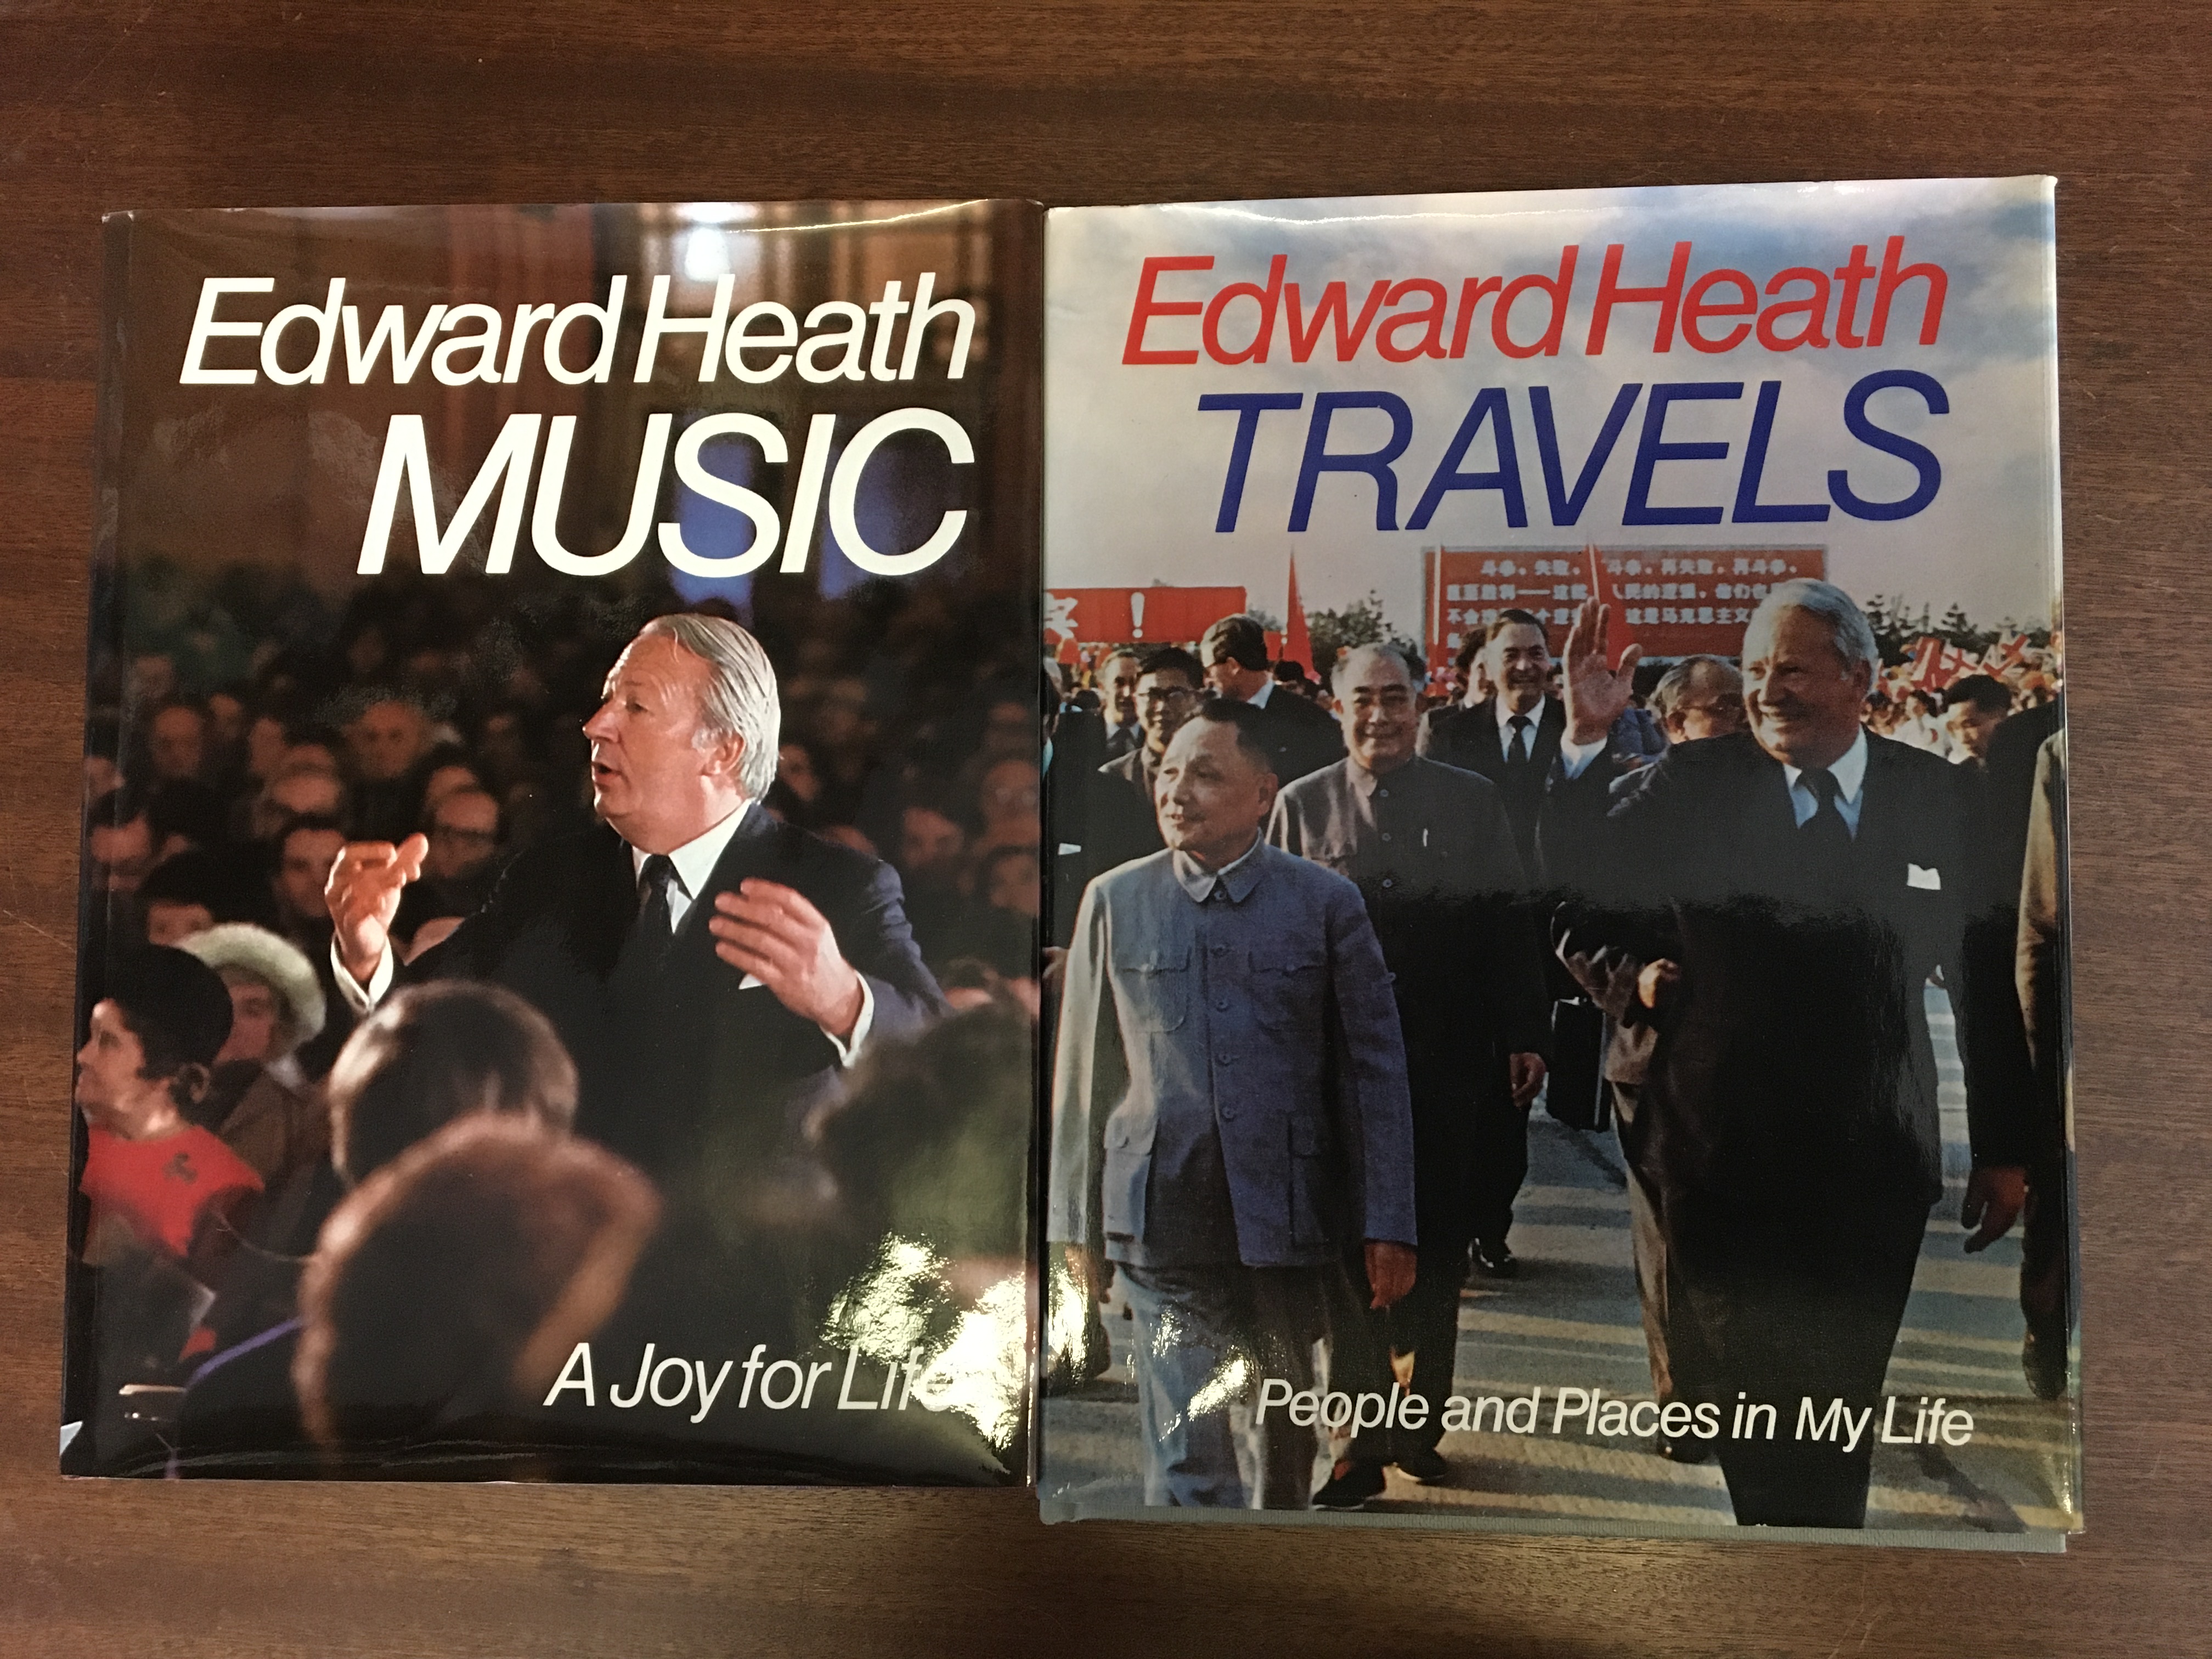 Signed editions of Edward Heath, ‘Music: A Joy for Life’, 1976, and ‘Travels: People and Places in